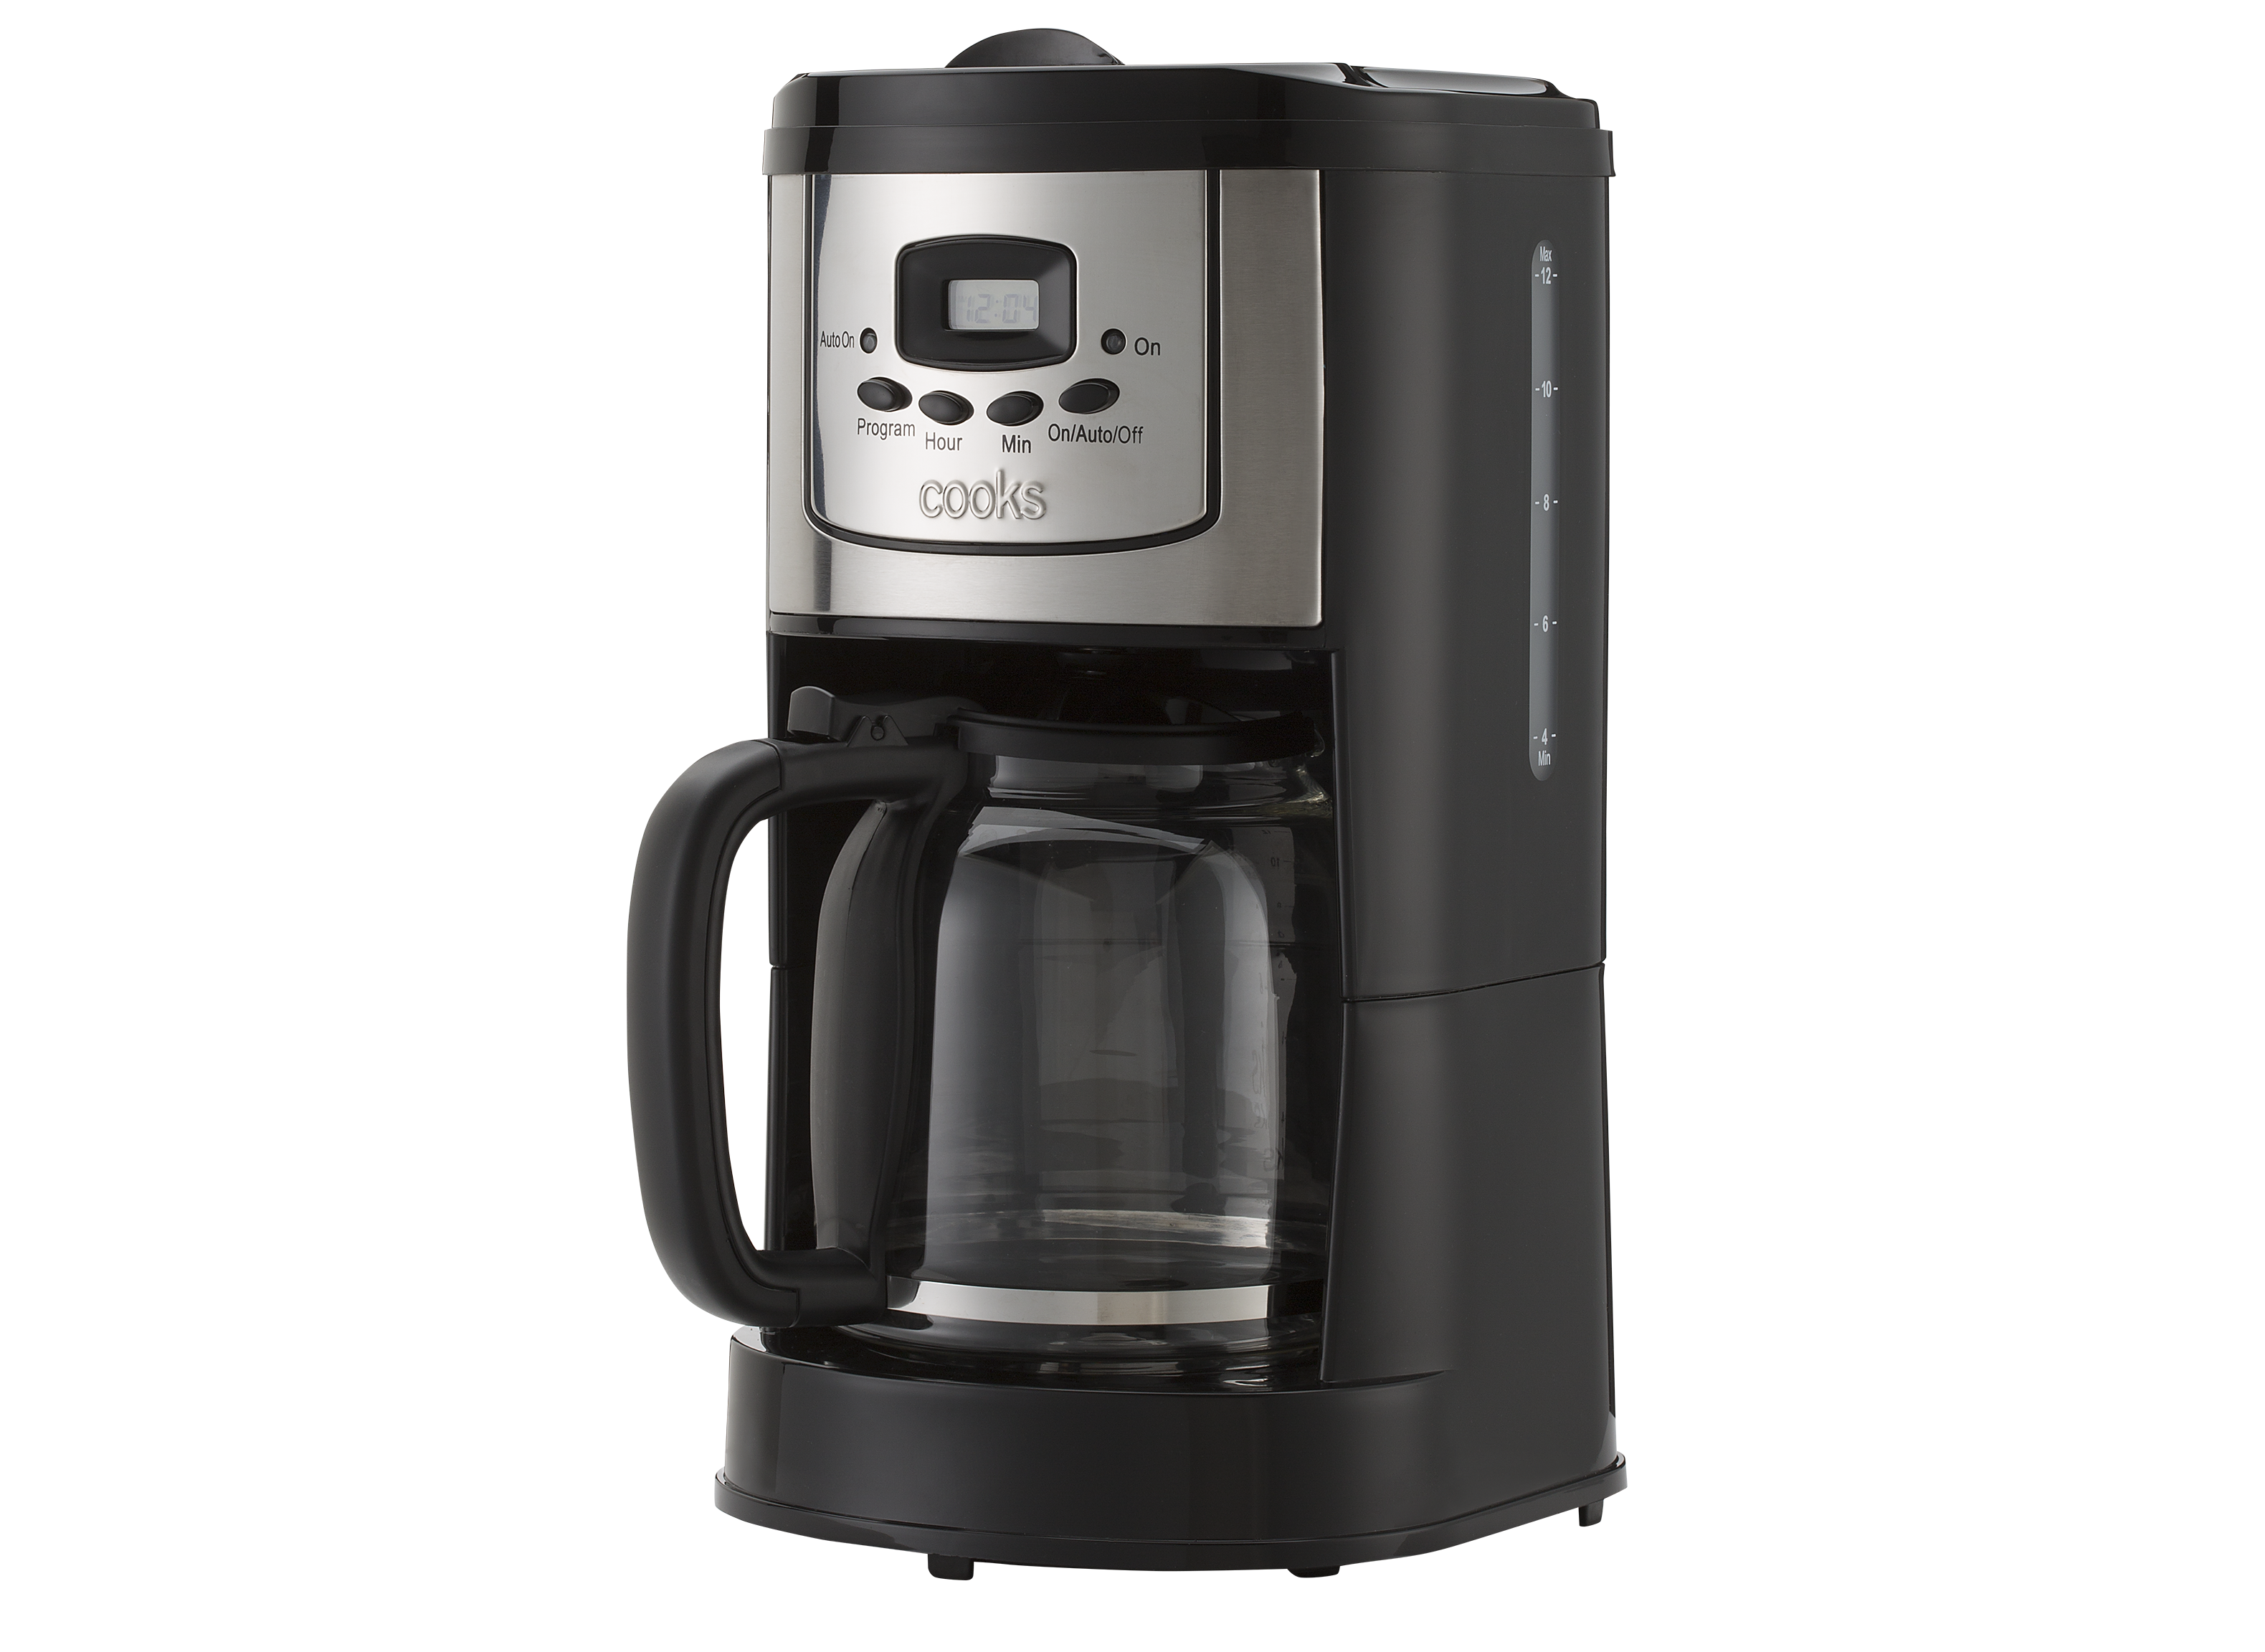 https://crdms.images.consumerreports.org/prod/products/cr/models/383072-coffeemakers-cooks-programmable12cupjcpenney.png